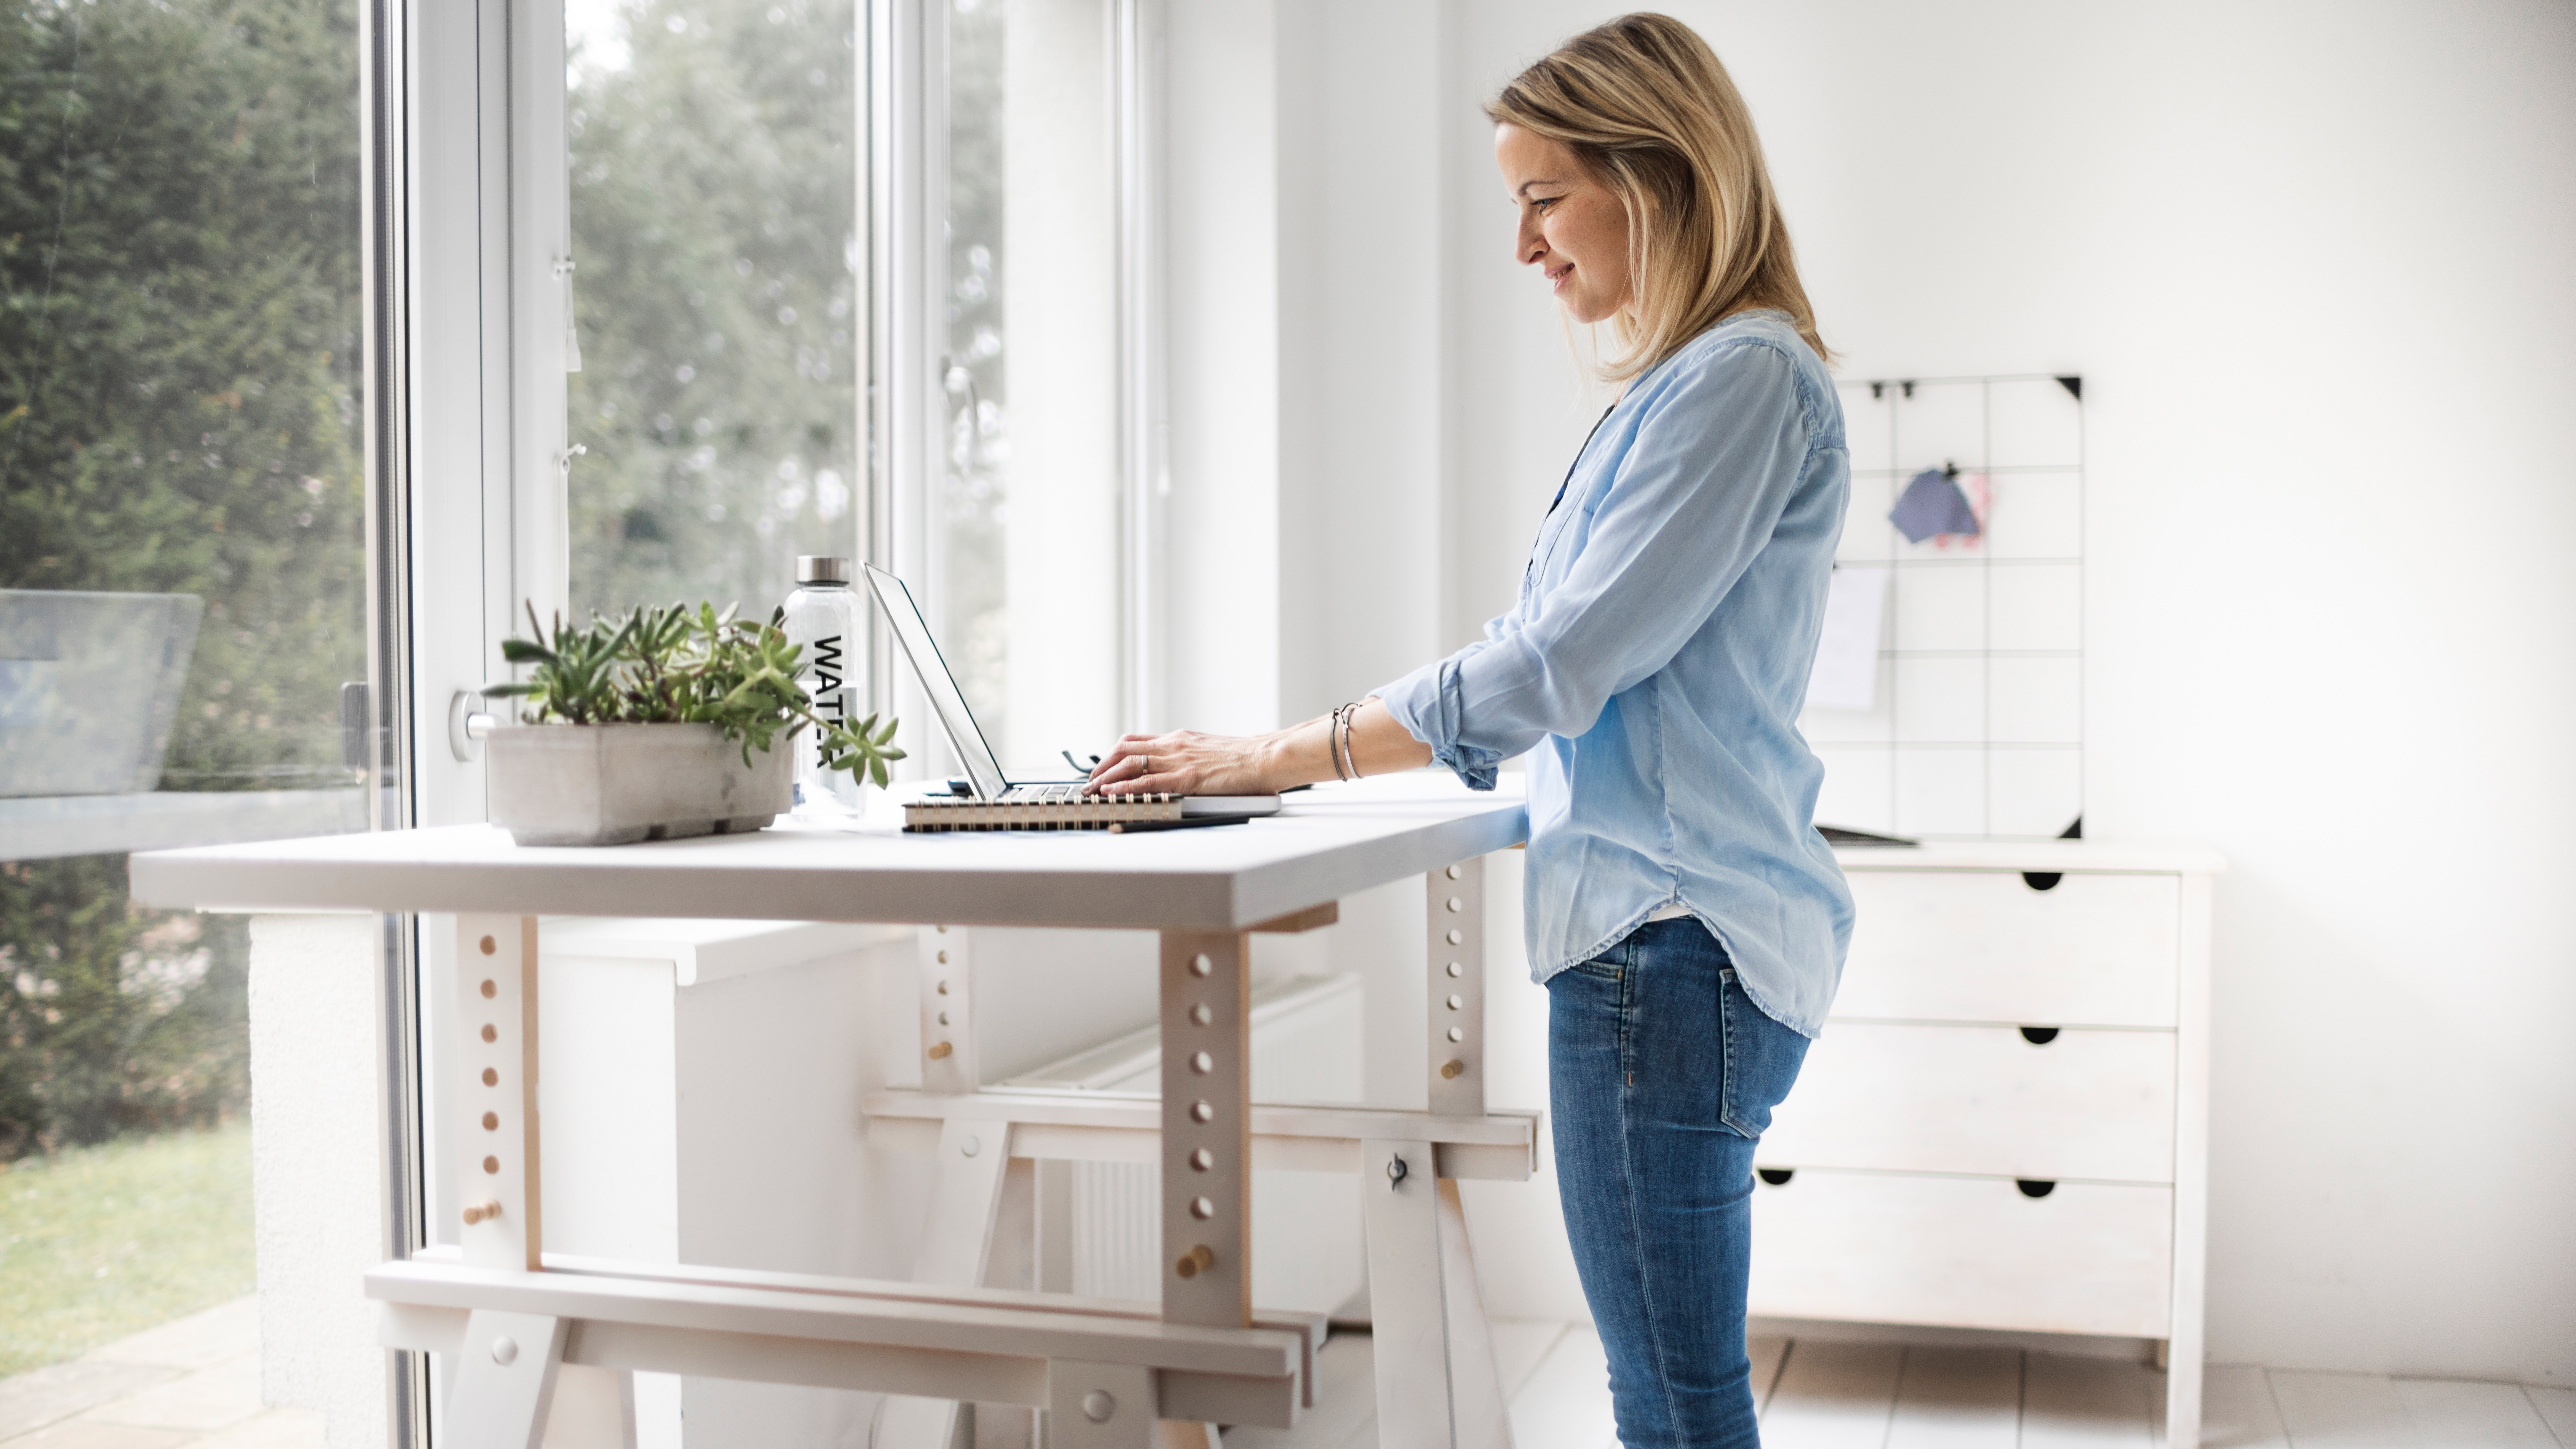 A woman working at a standing desk